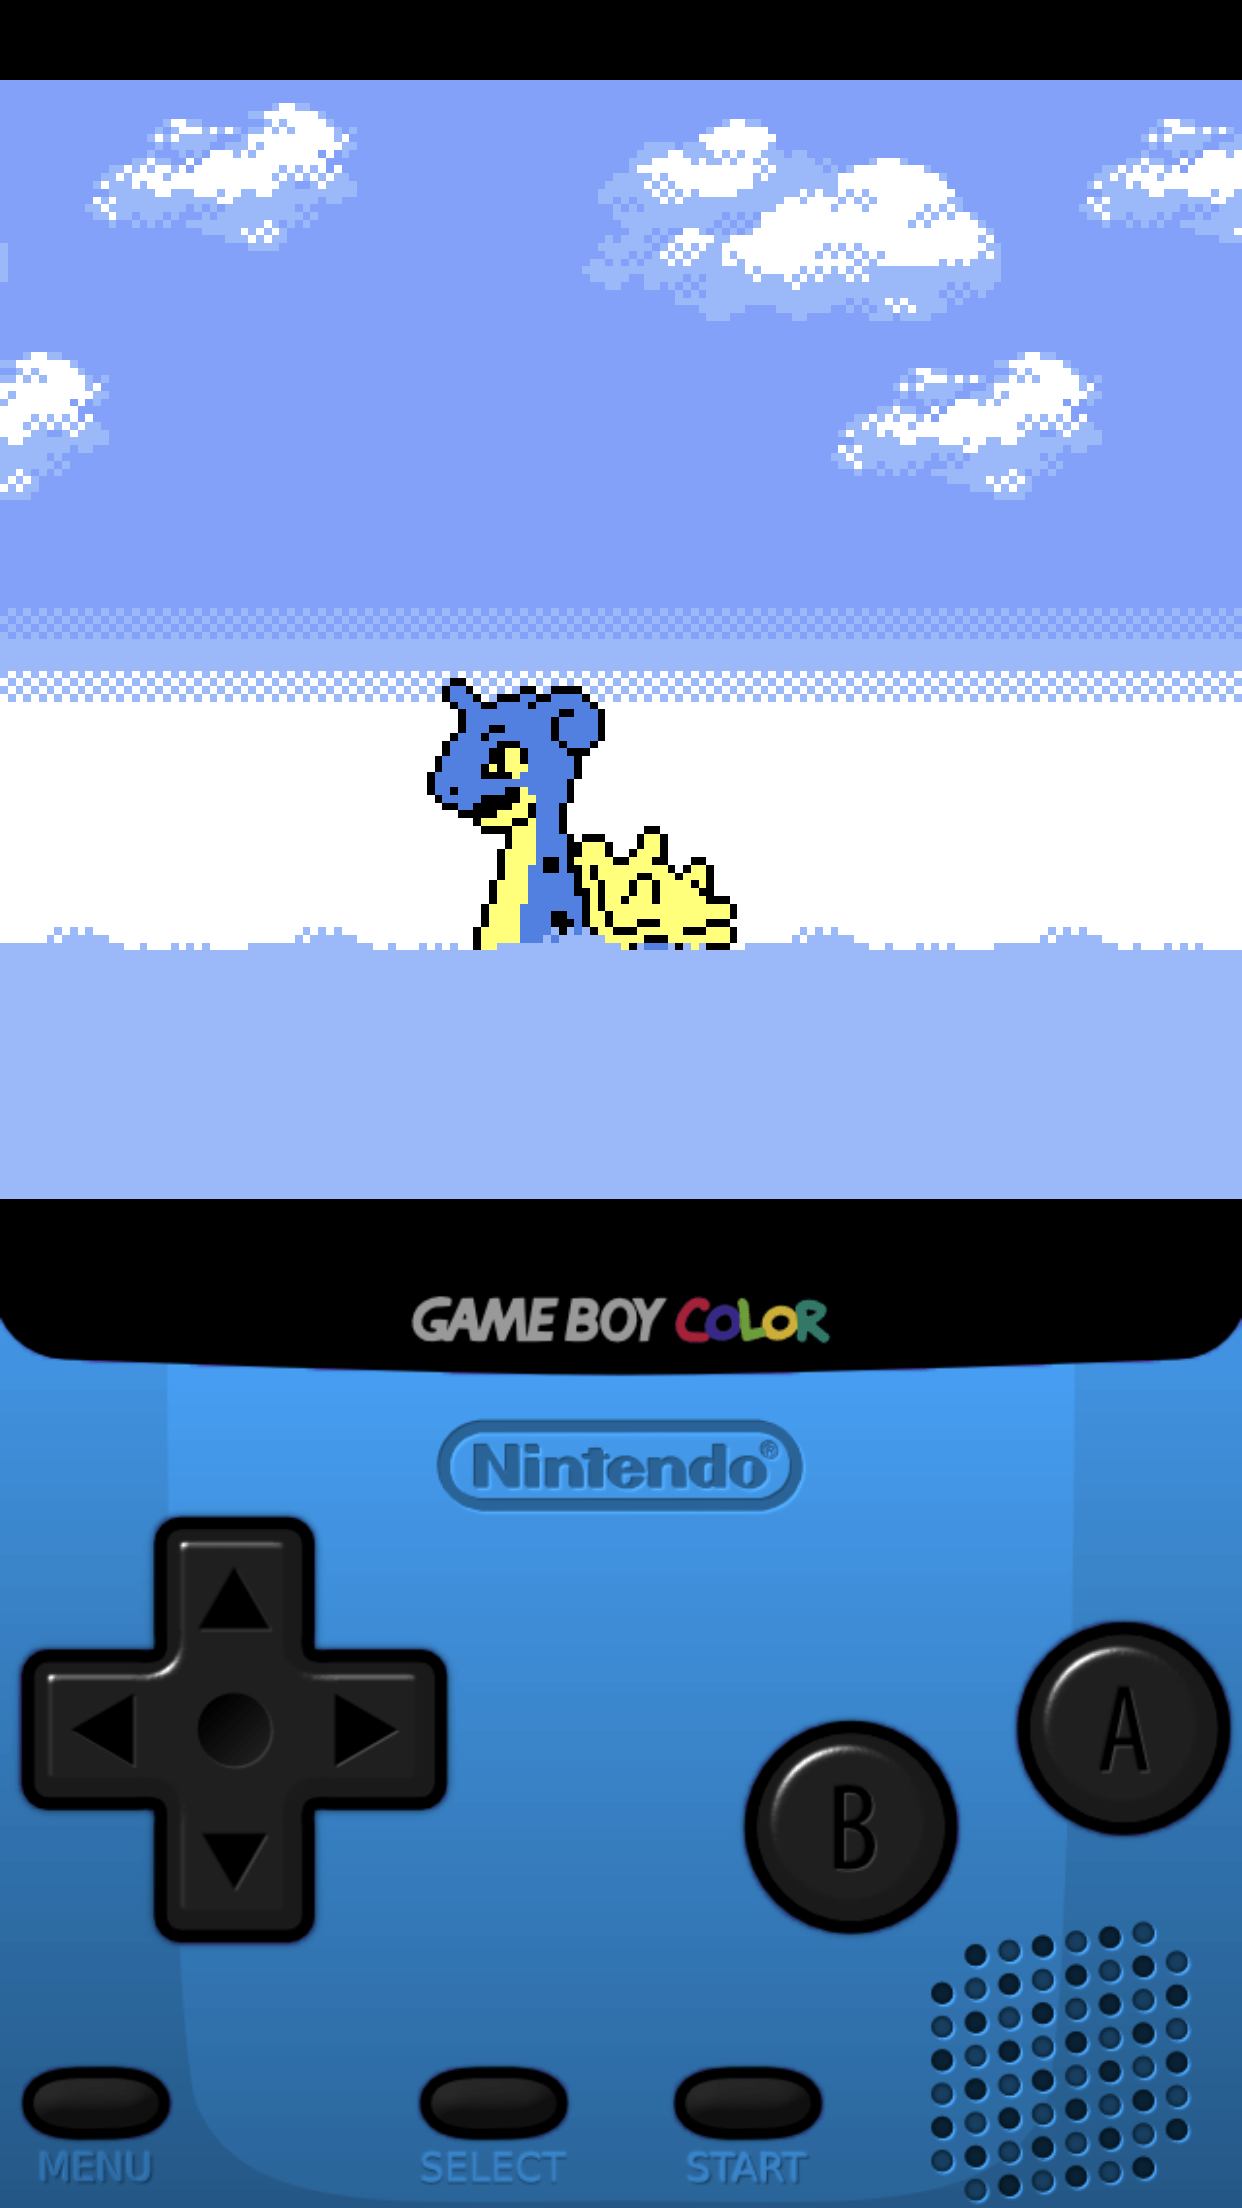 Used raytj9s Gameboy wallpaper for my GBA emulator I left the screen at  of ratio because the proportions would be really weird if I made it fit  perfectly  rgalaxyzflip